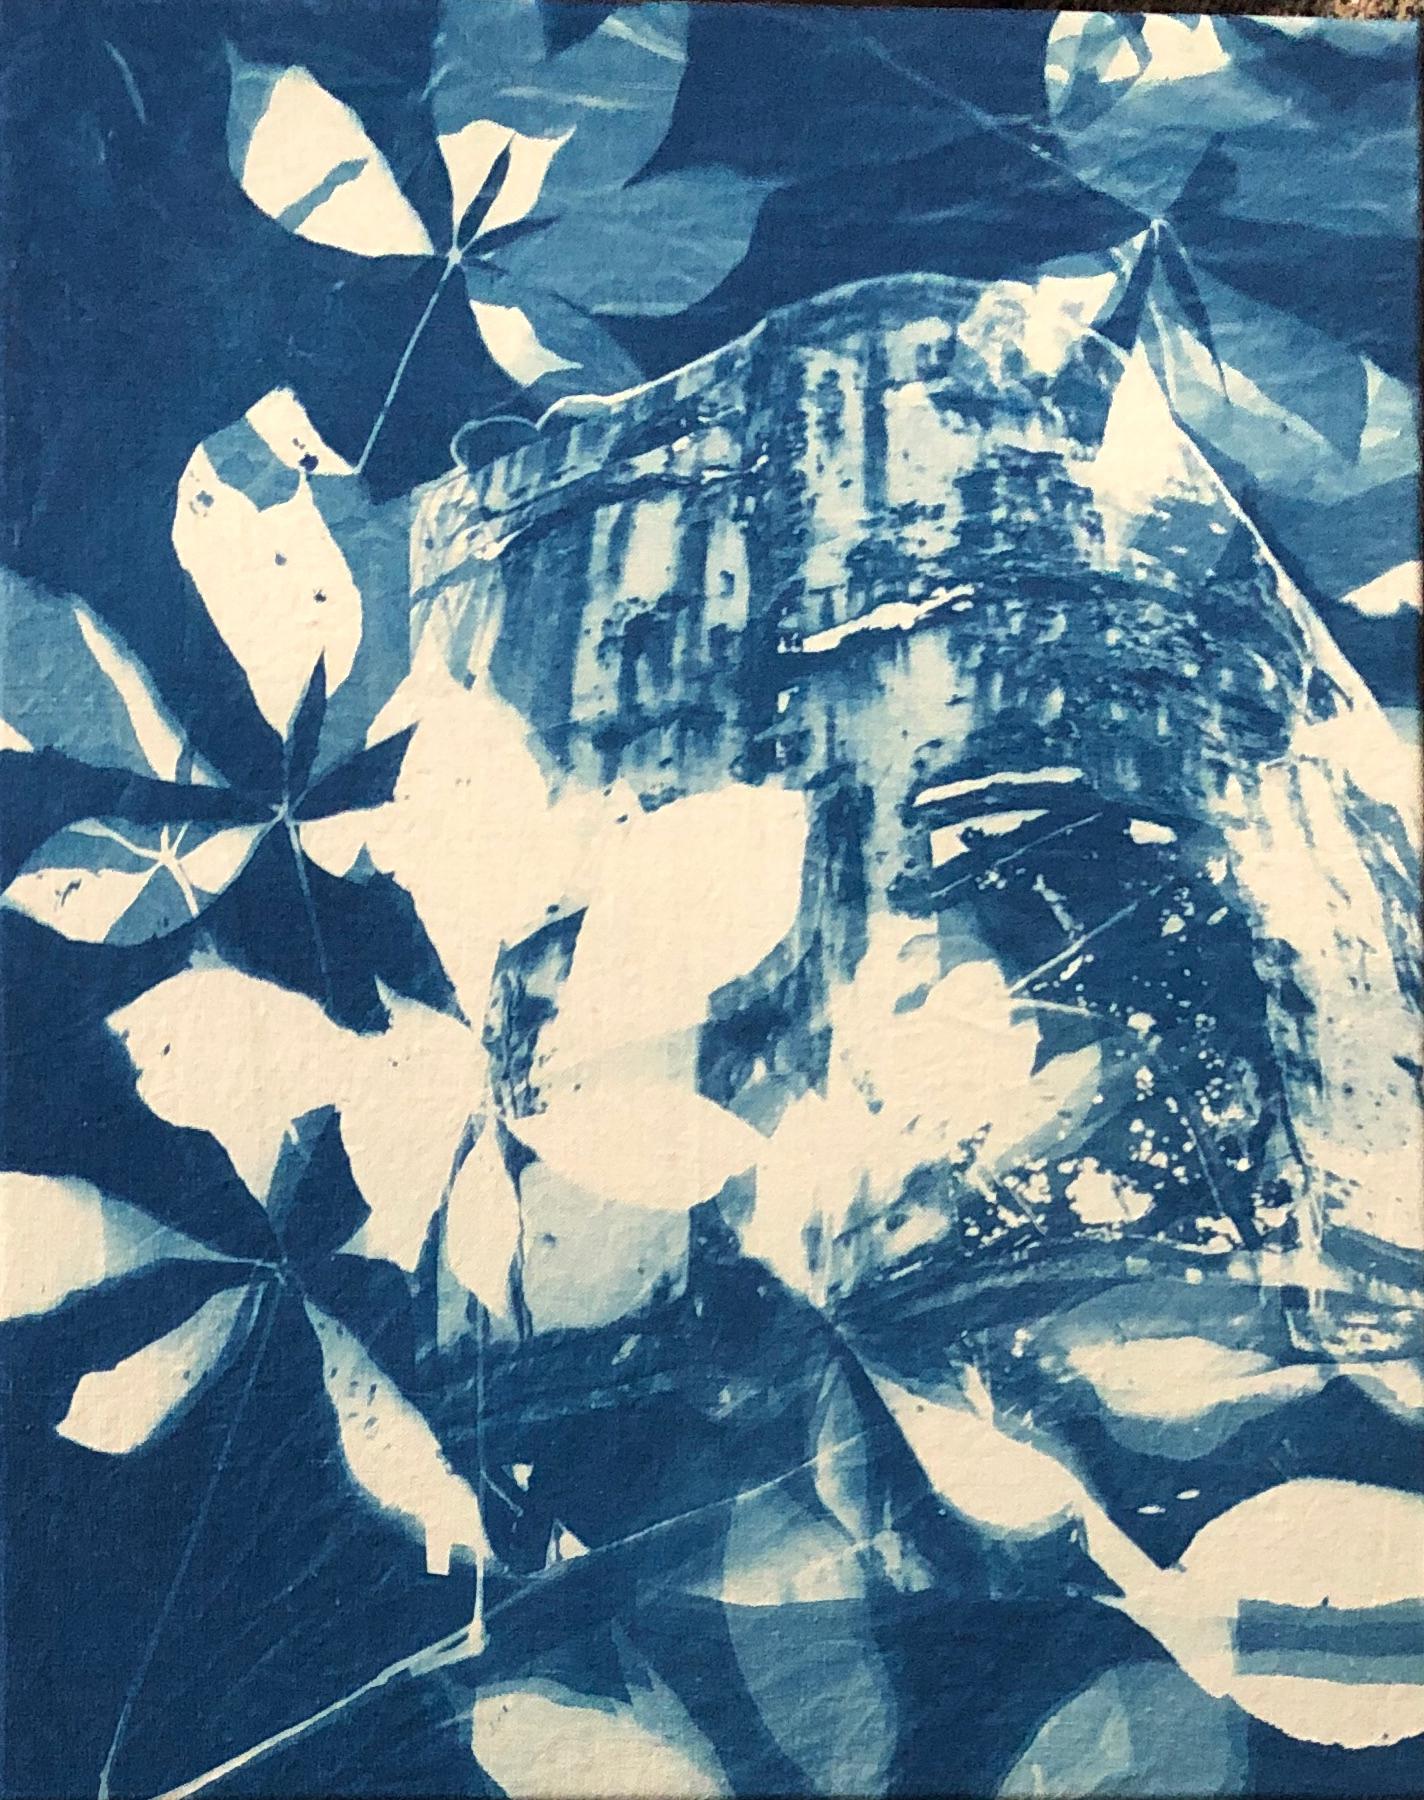 "Crane 5", contemporary, industrial, leaves, blue, cyanotype, photograph